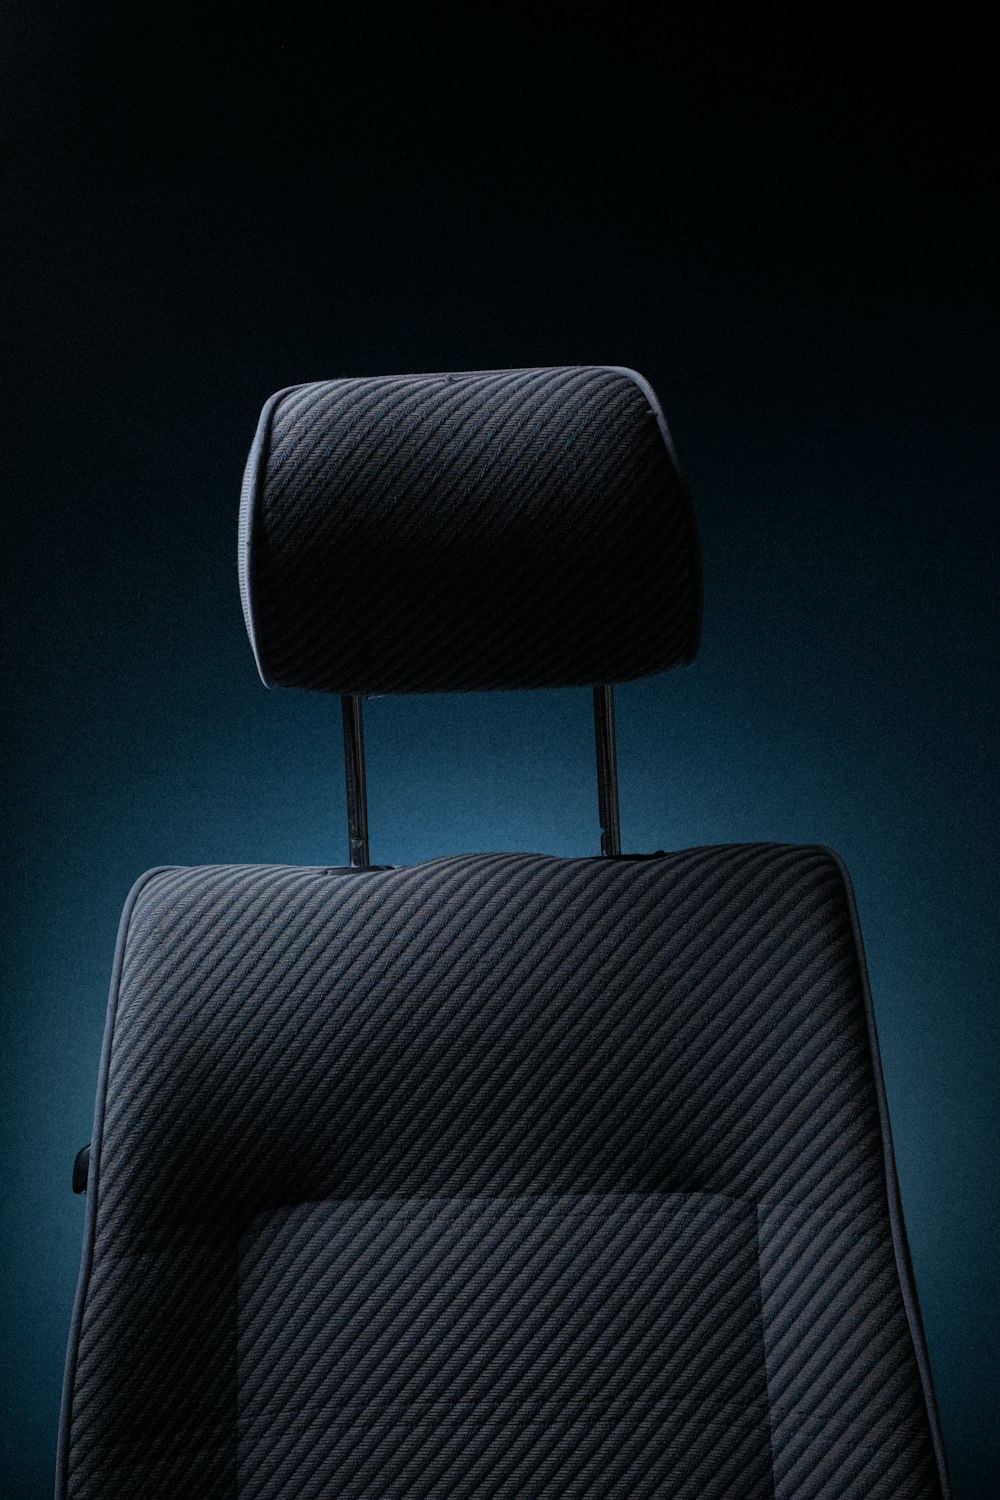 a black piece of luggage sitting on top of a chair